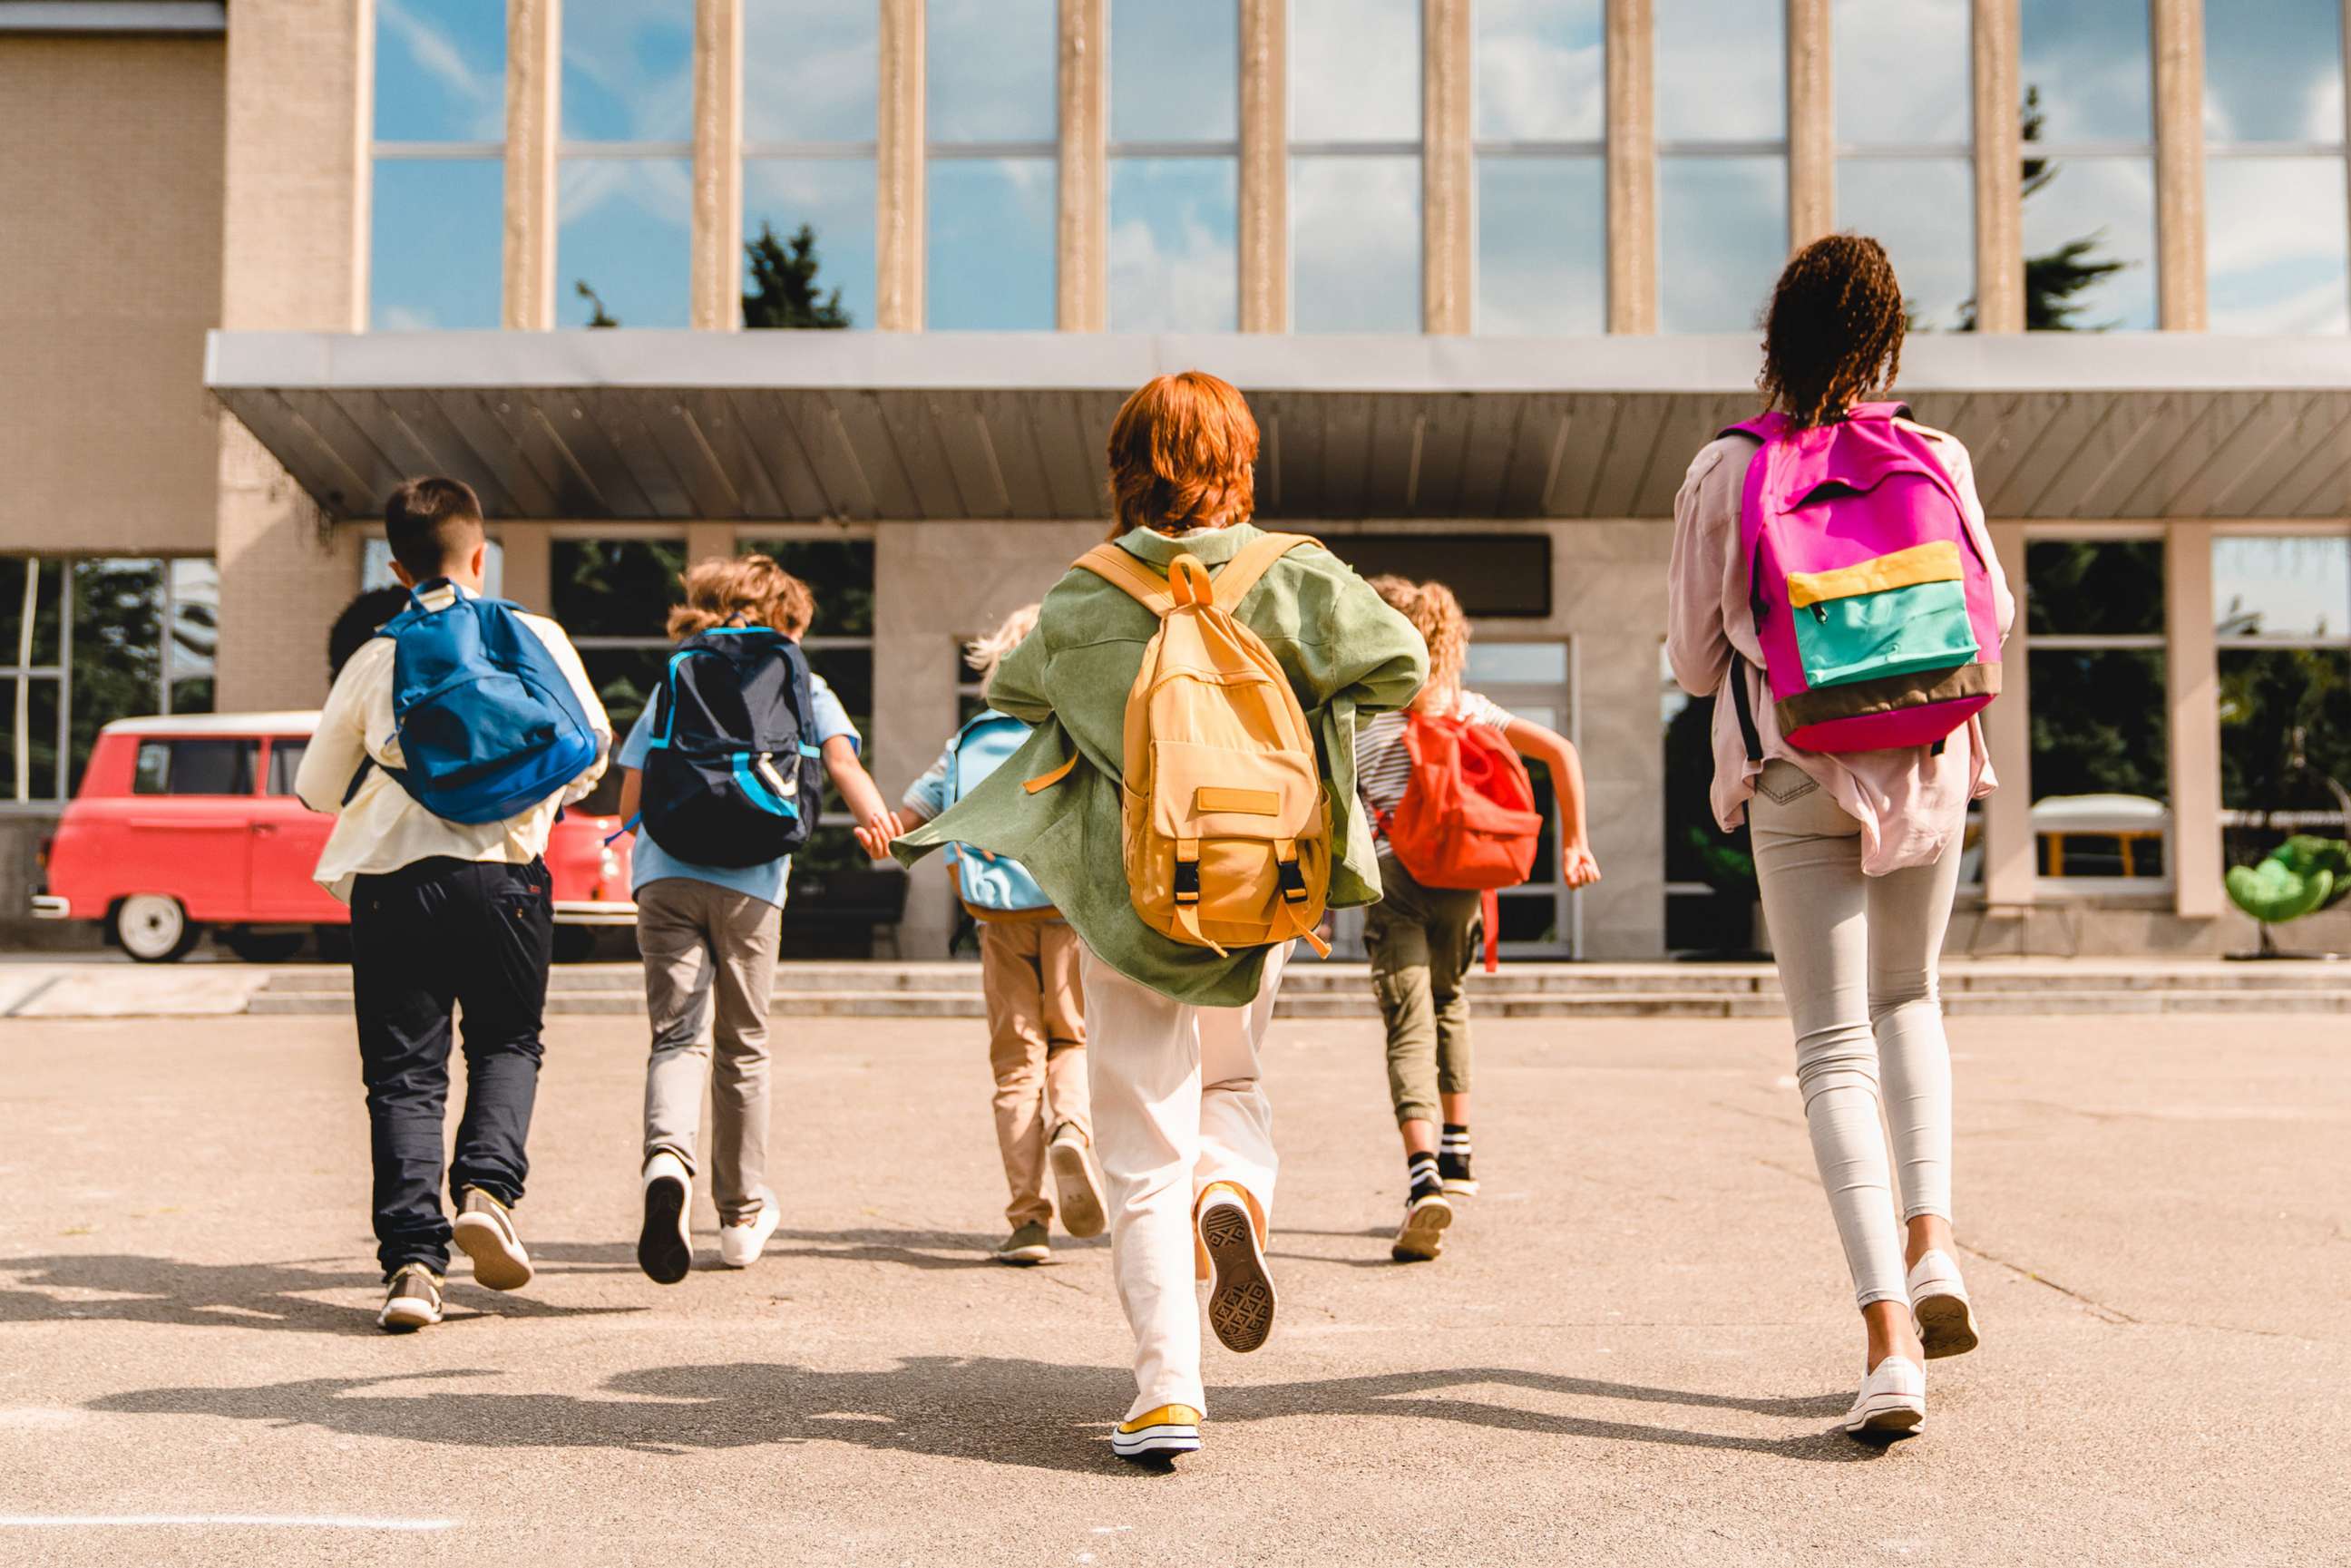 PHOTO: Students walking into a school in an undated stock photo.